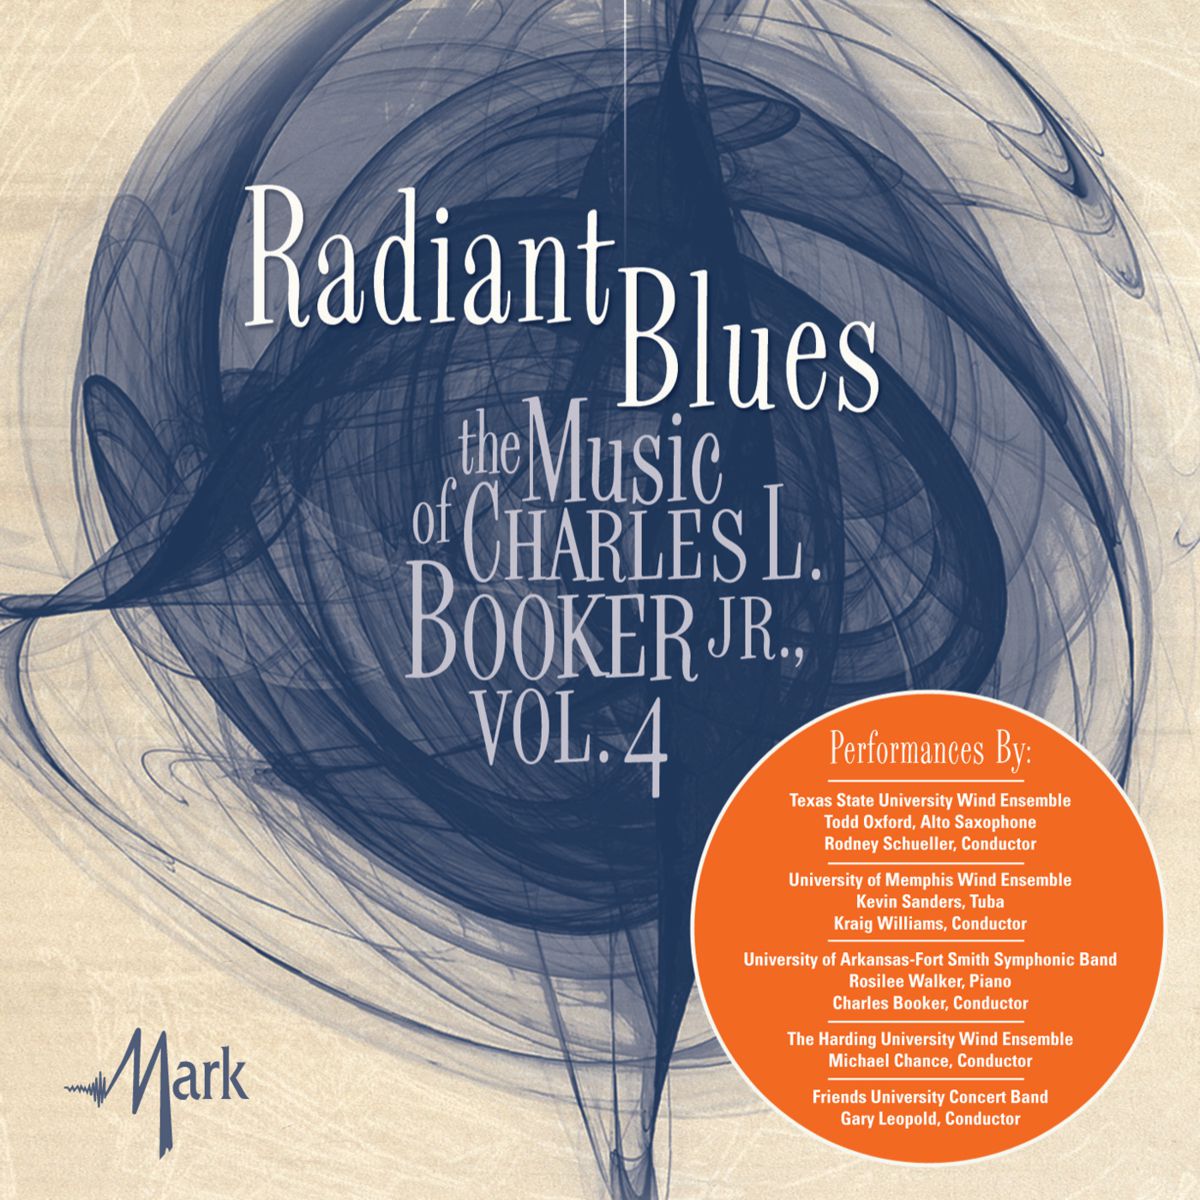 Music of Charles L. Booker Jr., The #4: Radiant Blues - clicca qui